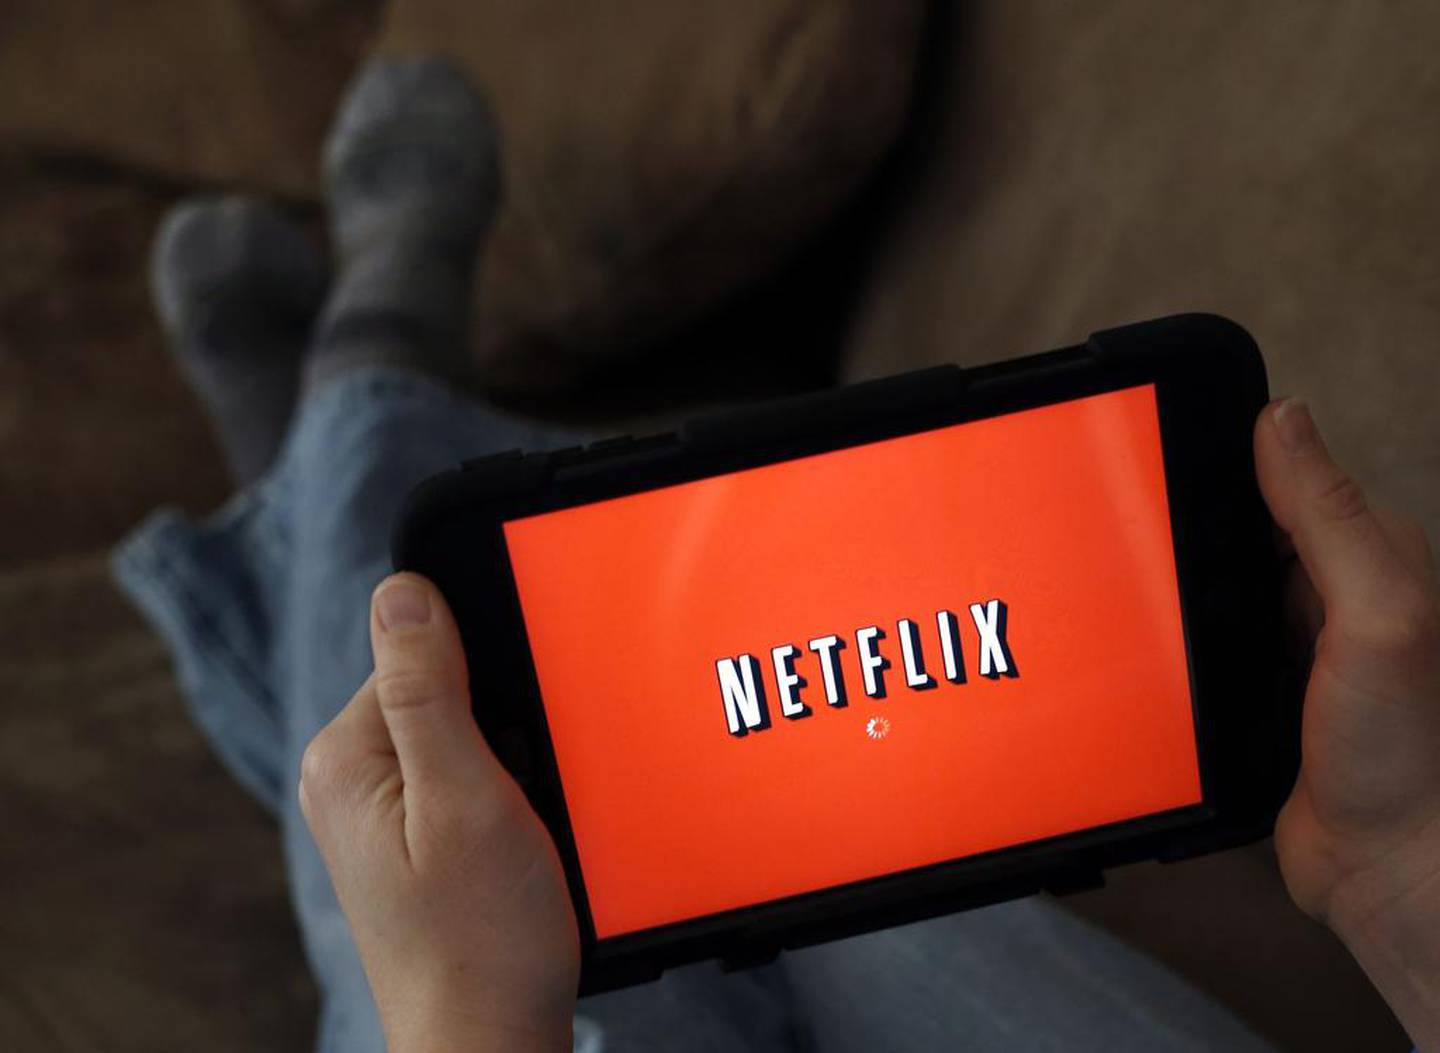 Netflix reportedly plans to offer video games on its streaming platform within a year. AP